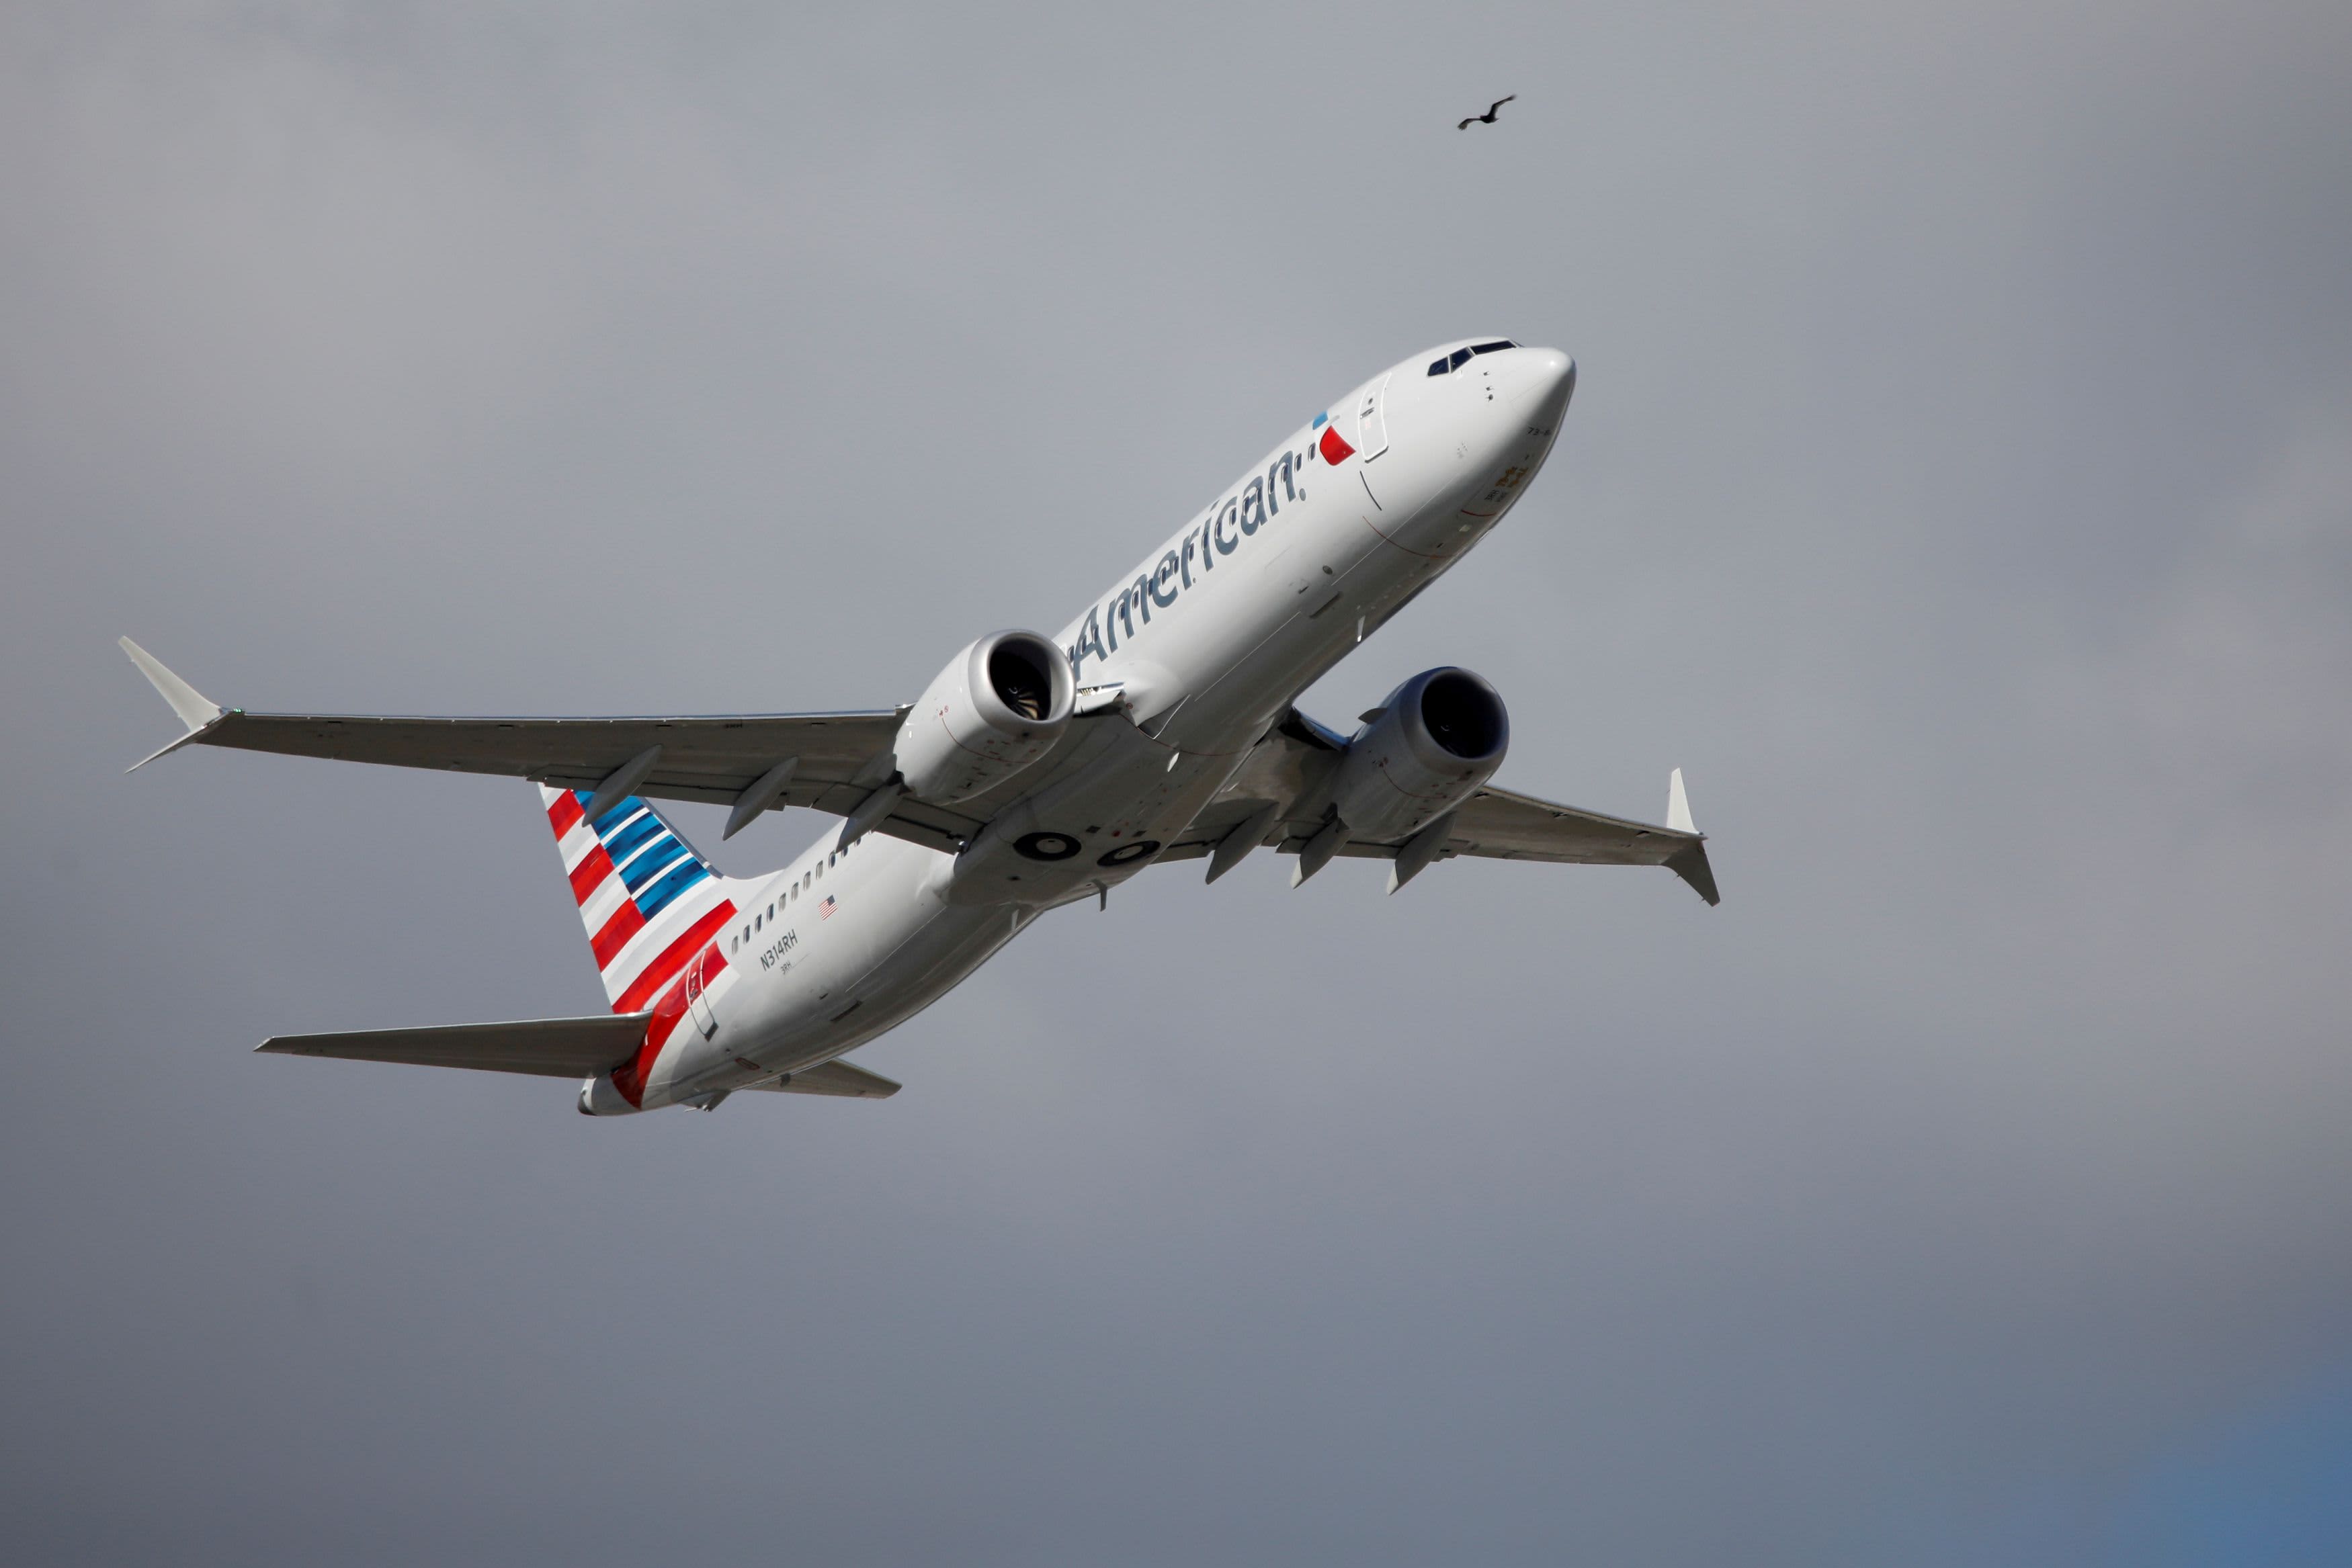 American Airlines will resume pilots’ fall this fall as travel demand recovers